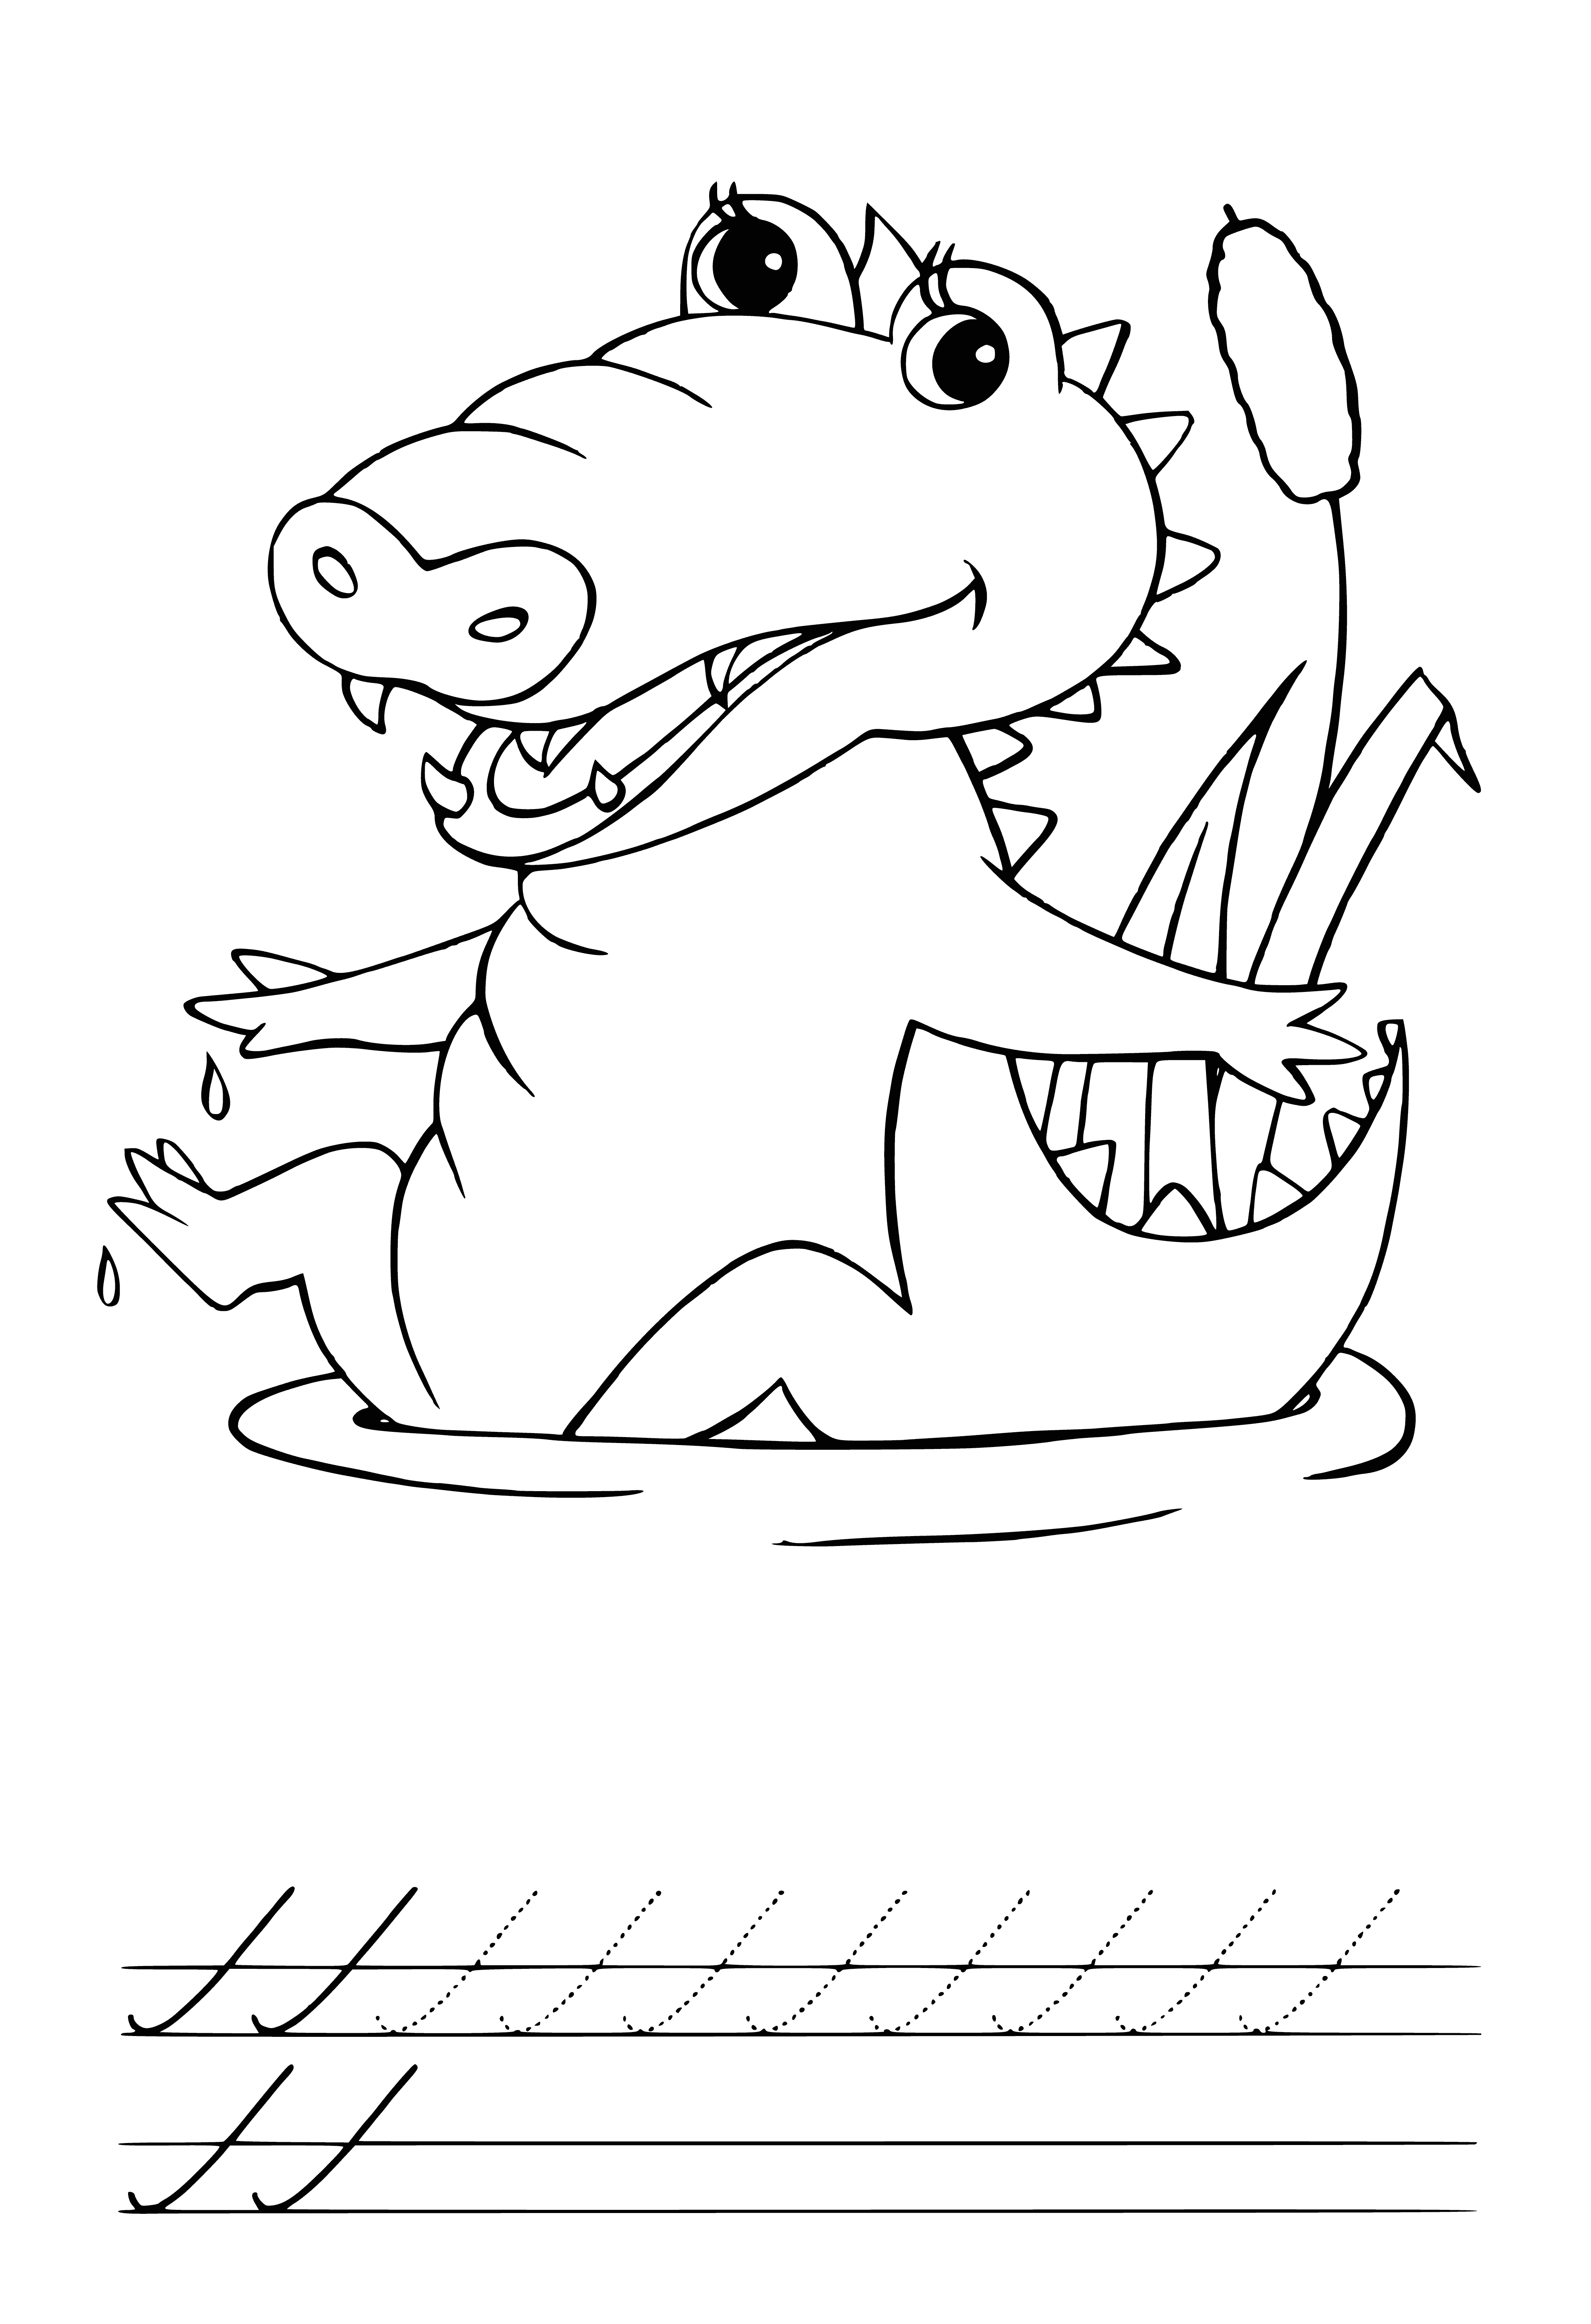 coloring page: Recipe for Crocodile: cut meat, combine w/ pork, veal, carrot, onion, bay leaves, peppercorns, tomato paste, flour & water. Season then boil & simmer 2 hrs. Remove bay leaves & serve.